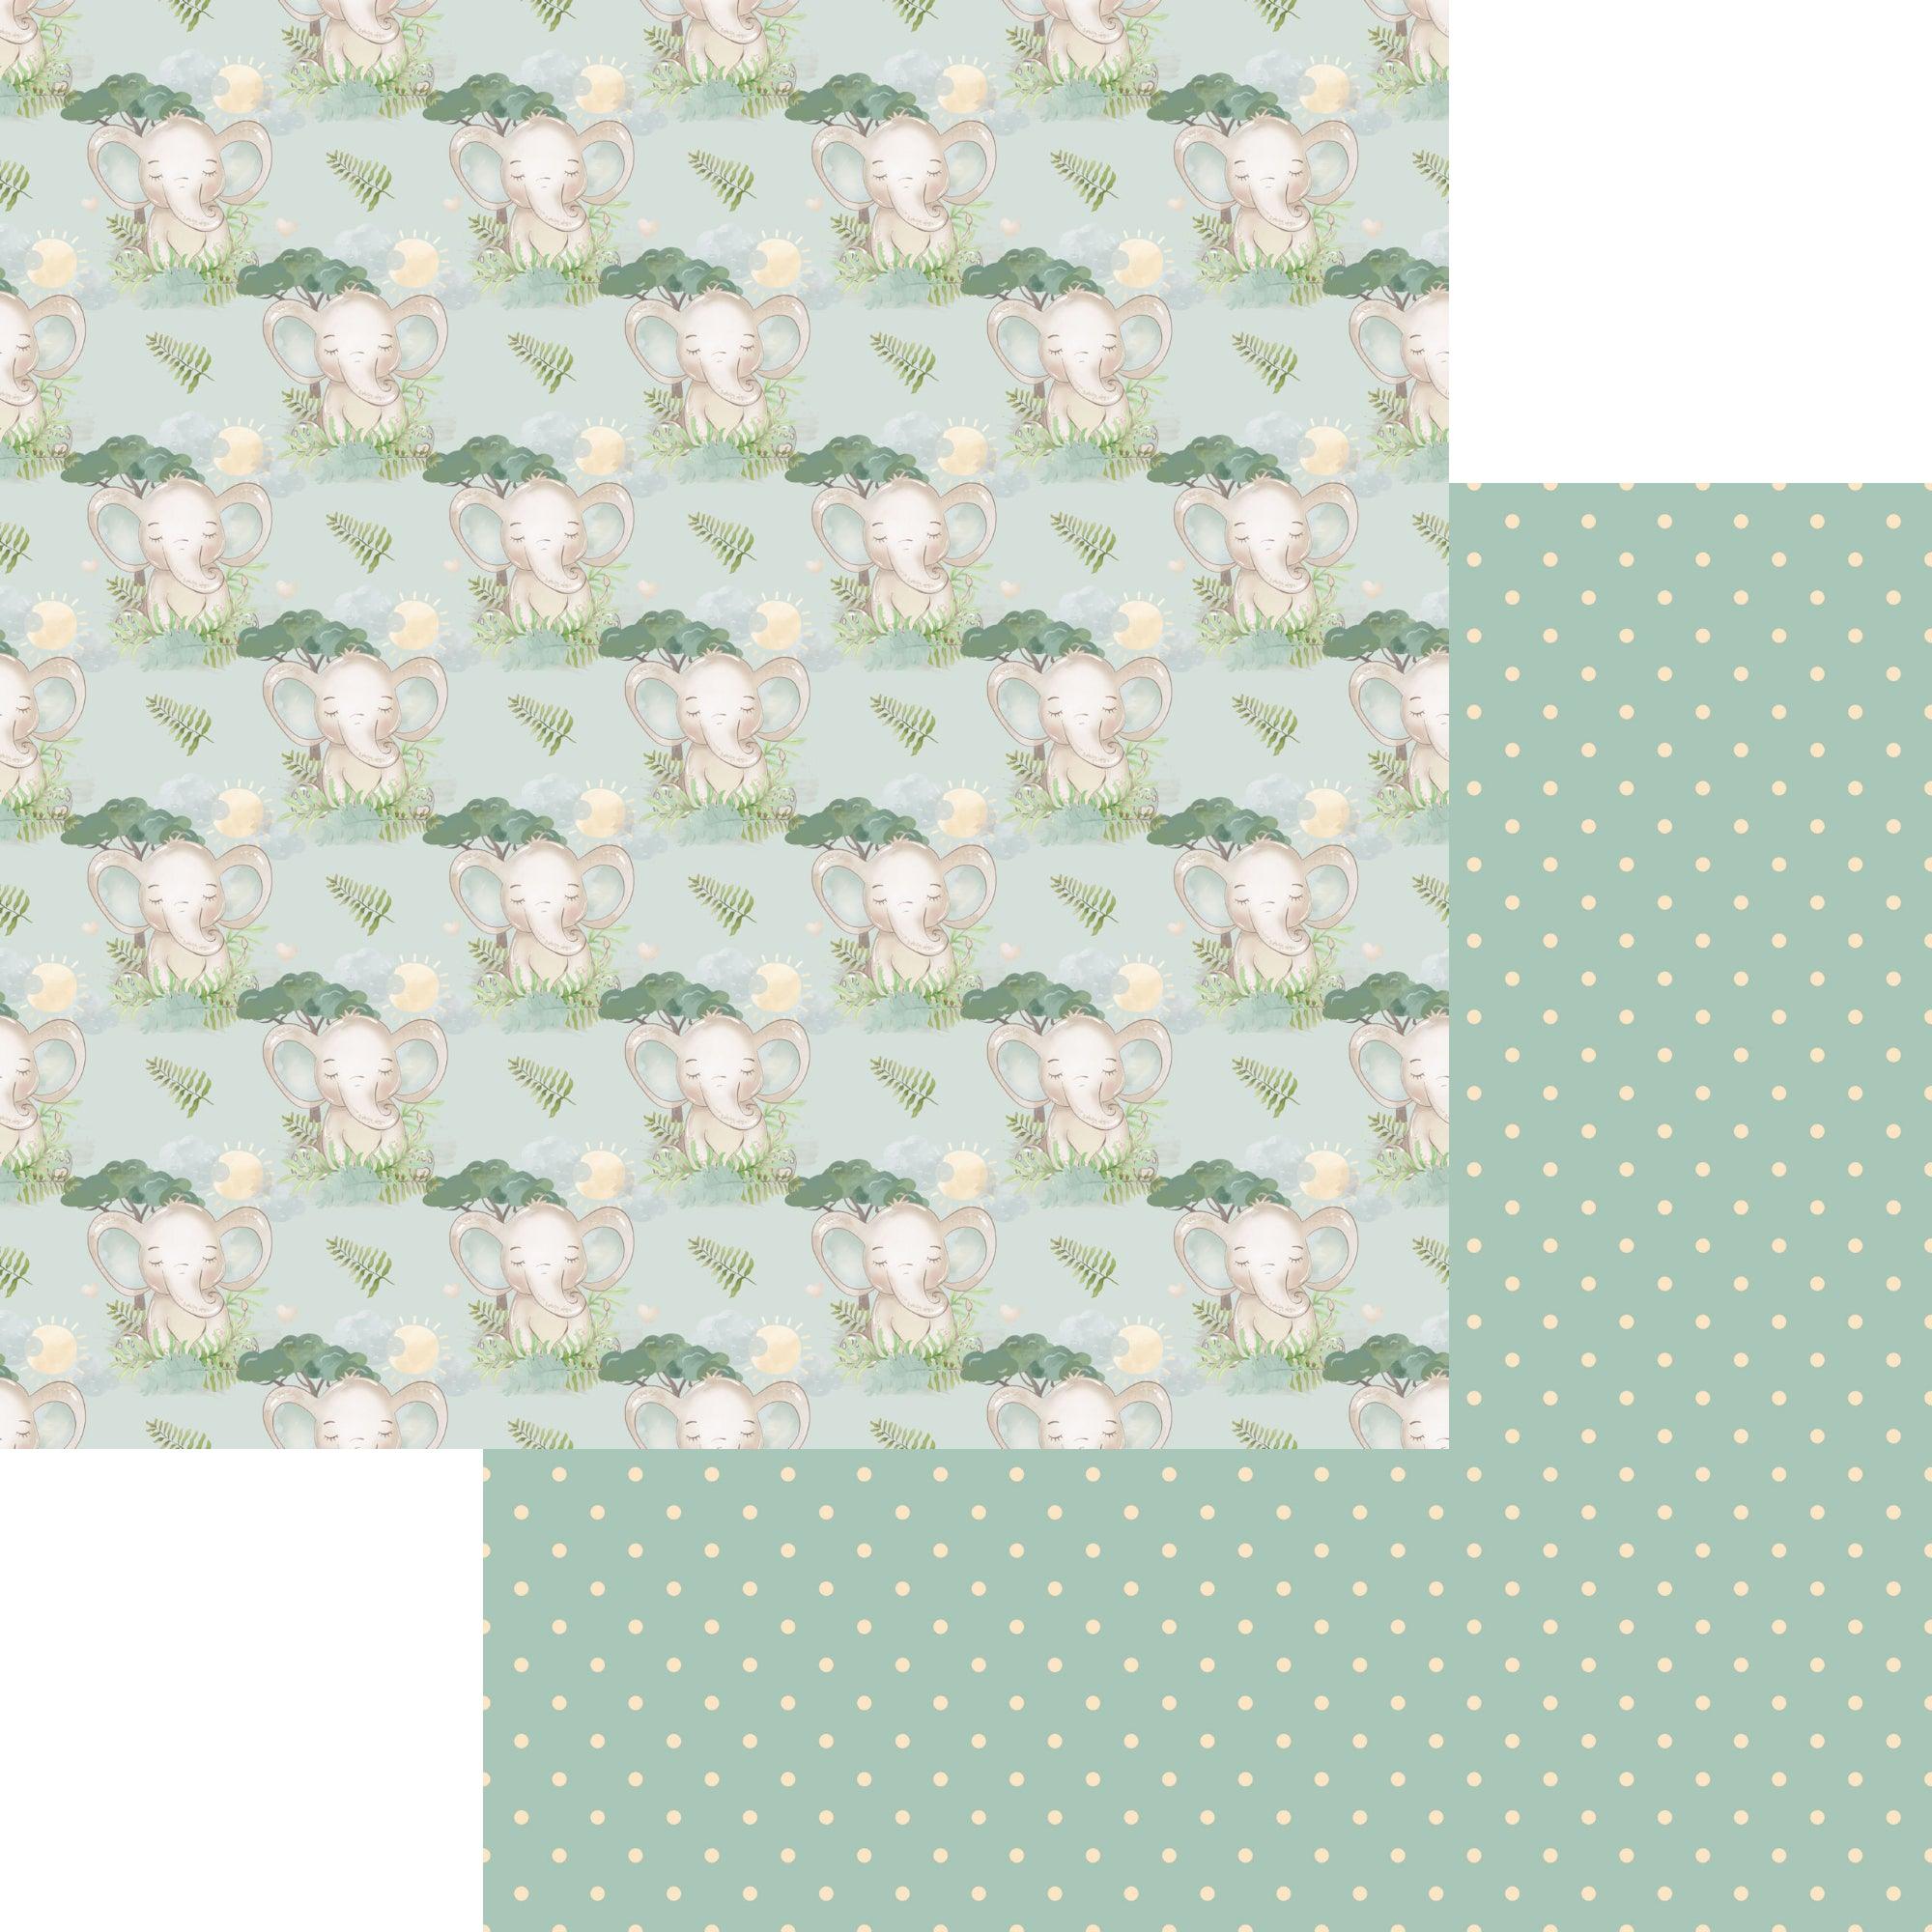 Baby Elephant Collection Cutie Pie 12 x 12 Double-Sided Scrapbook Paper by SSC Designs - Scrapbook Supply Companies